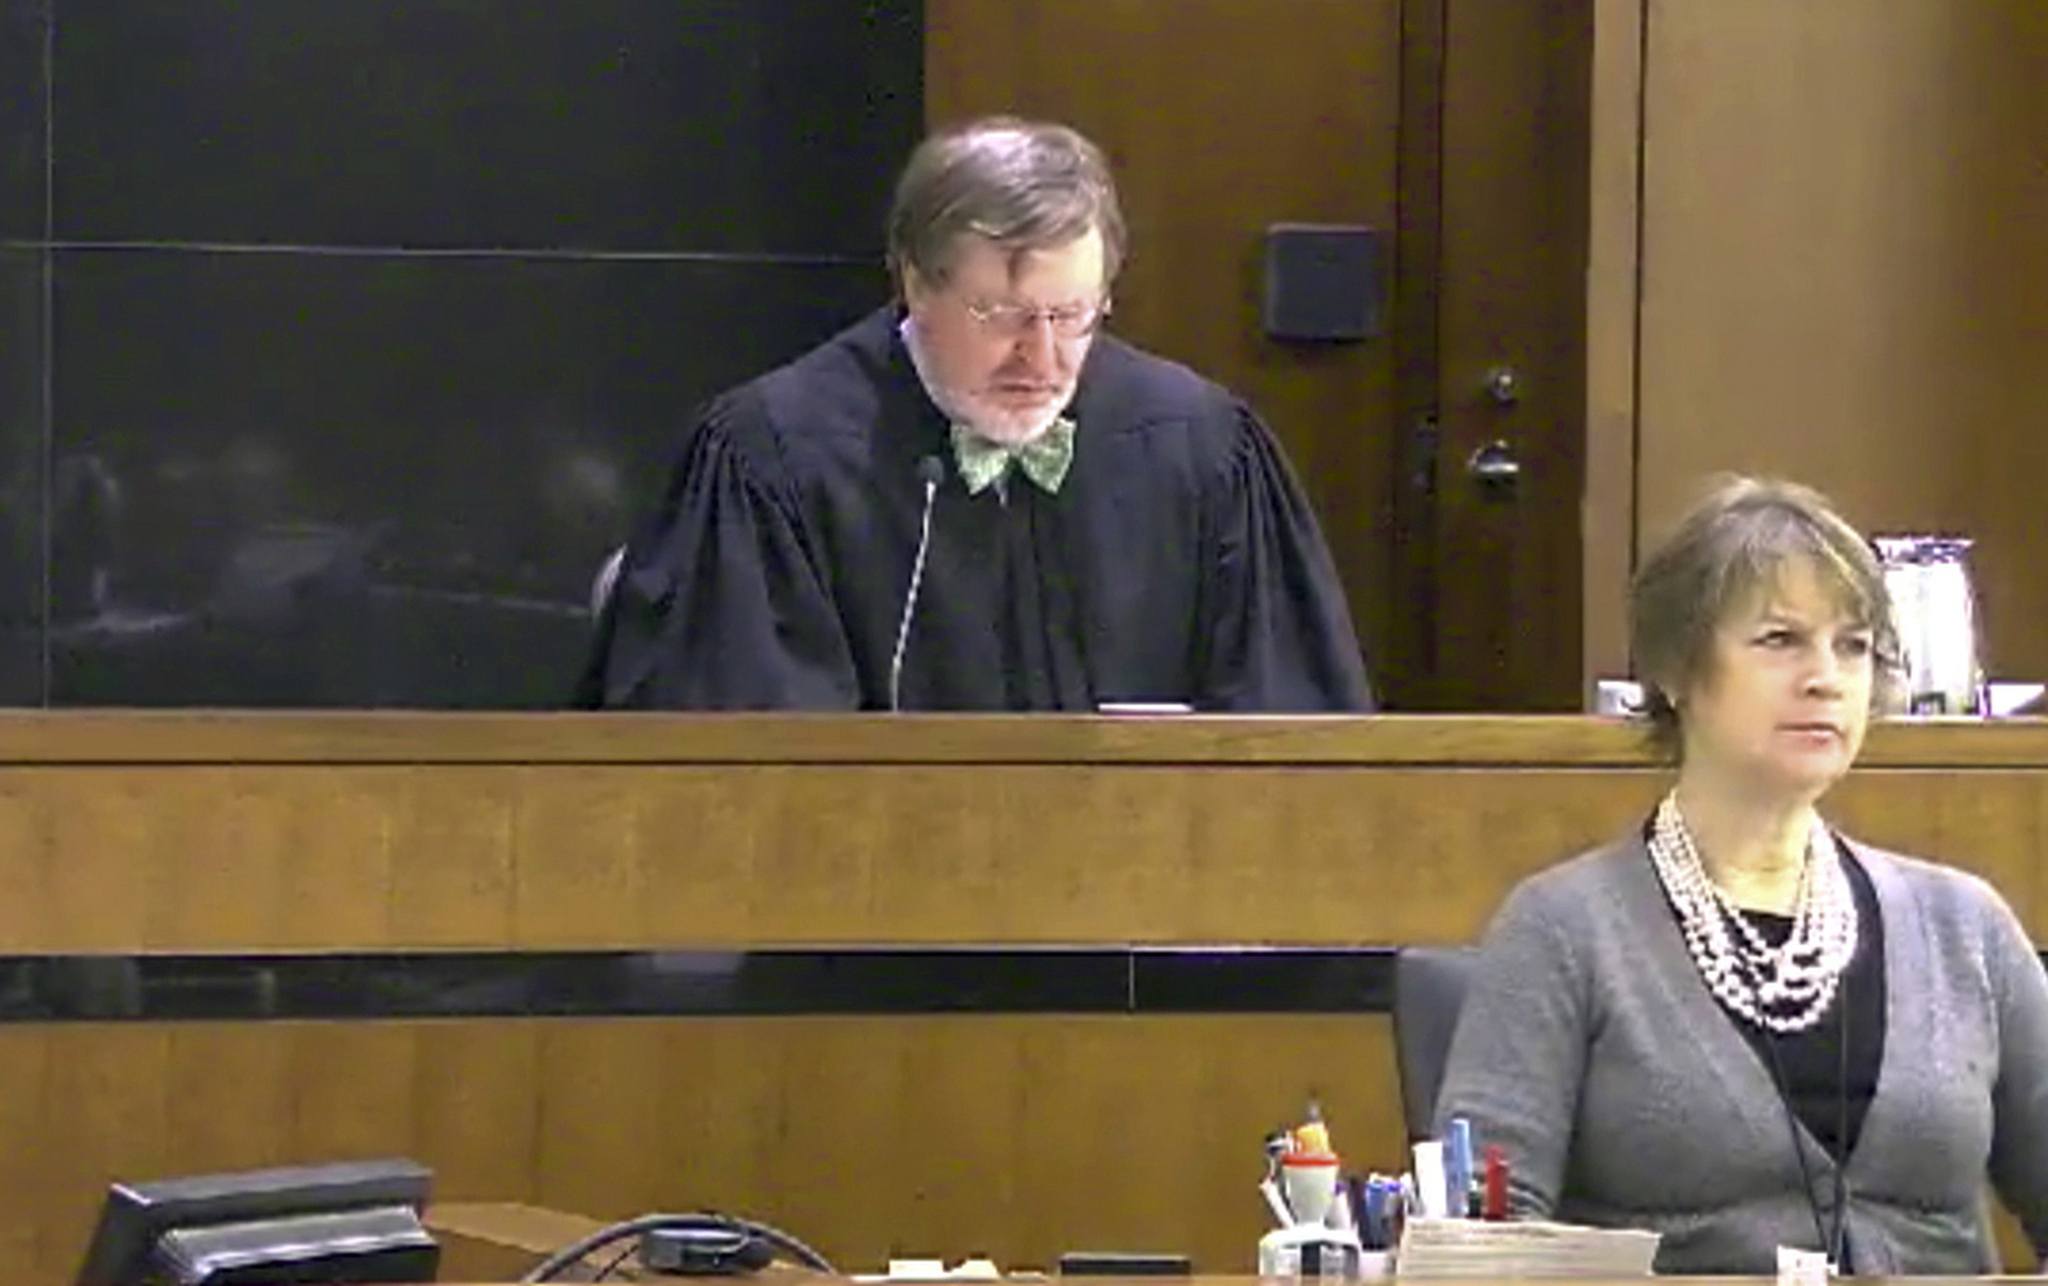 This March 12, 2013, still image taken from United States Courts shows Judge James Robart listening to a case at Seattle Courthouse in Seattle. (United States Courts via AP)